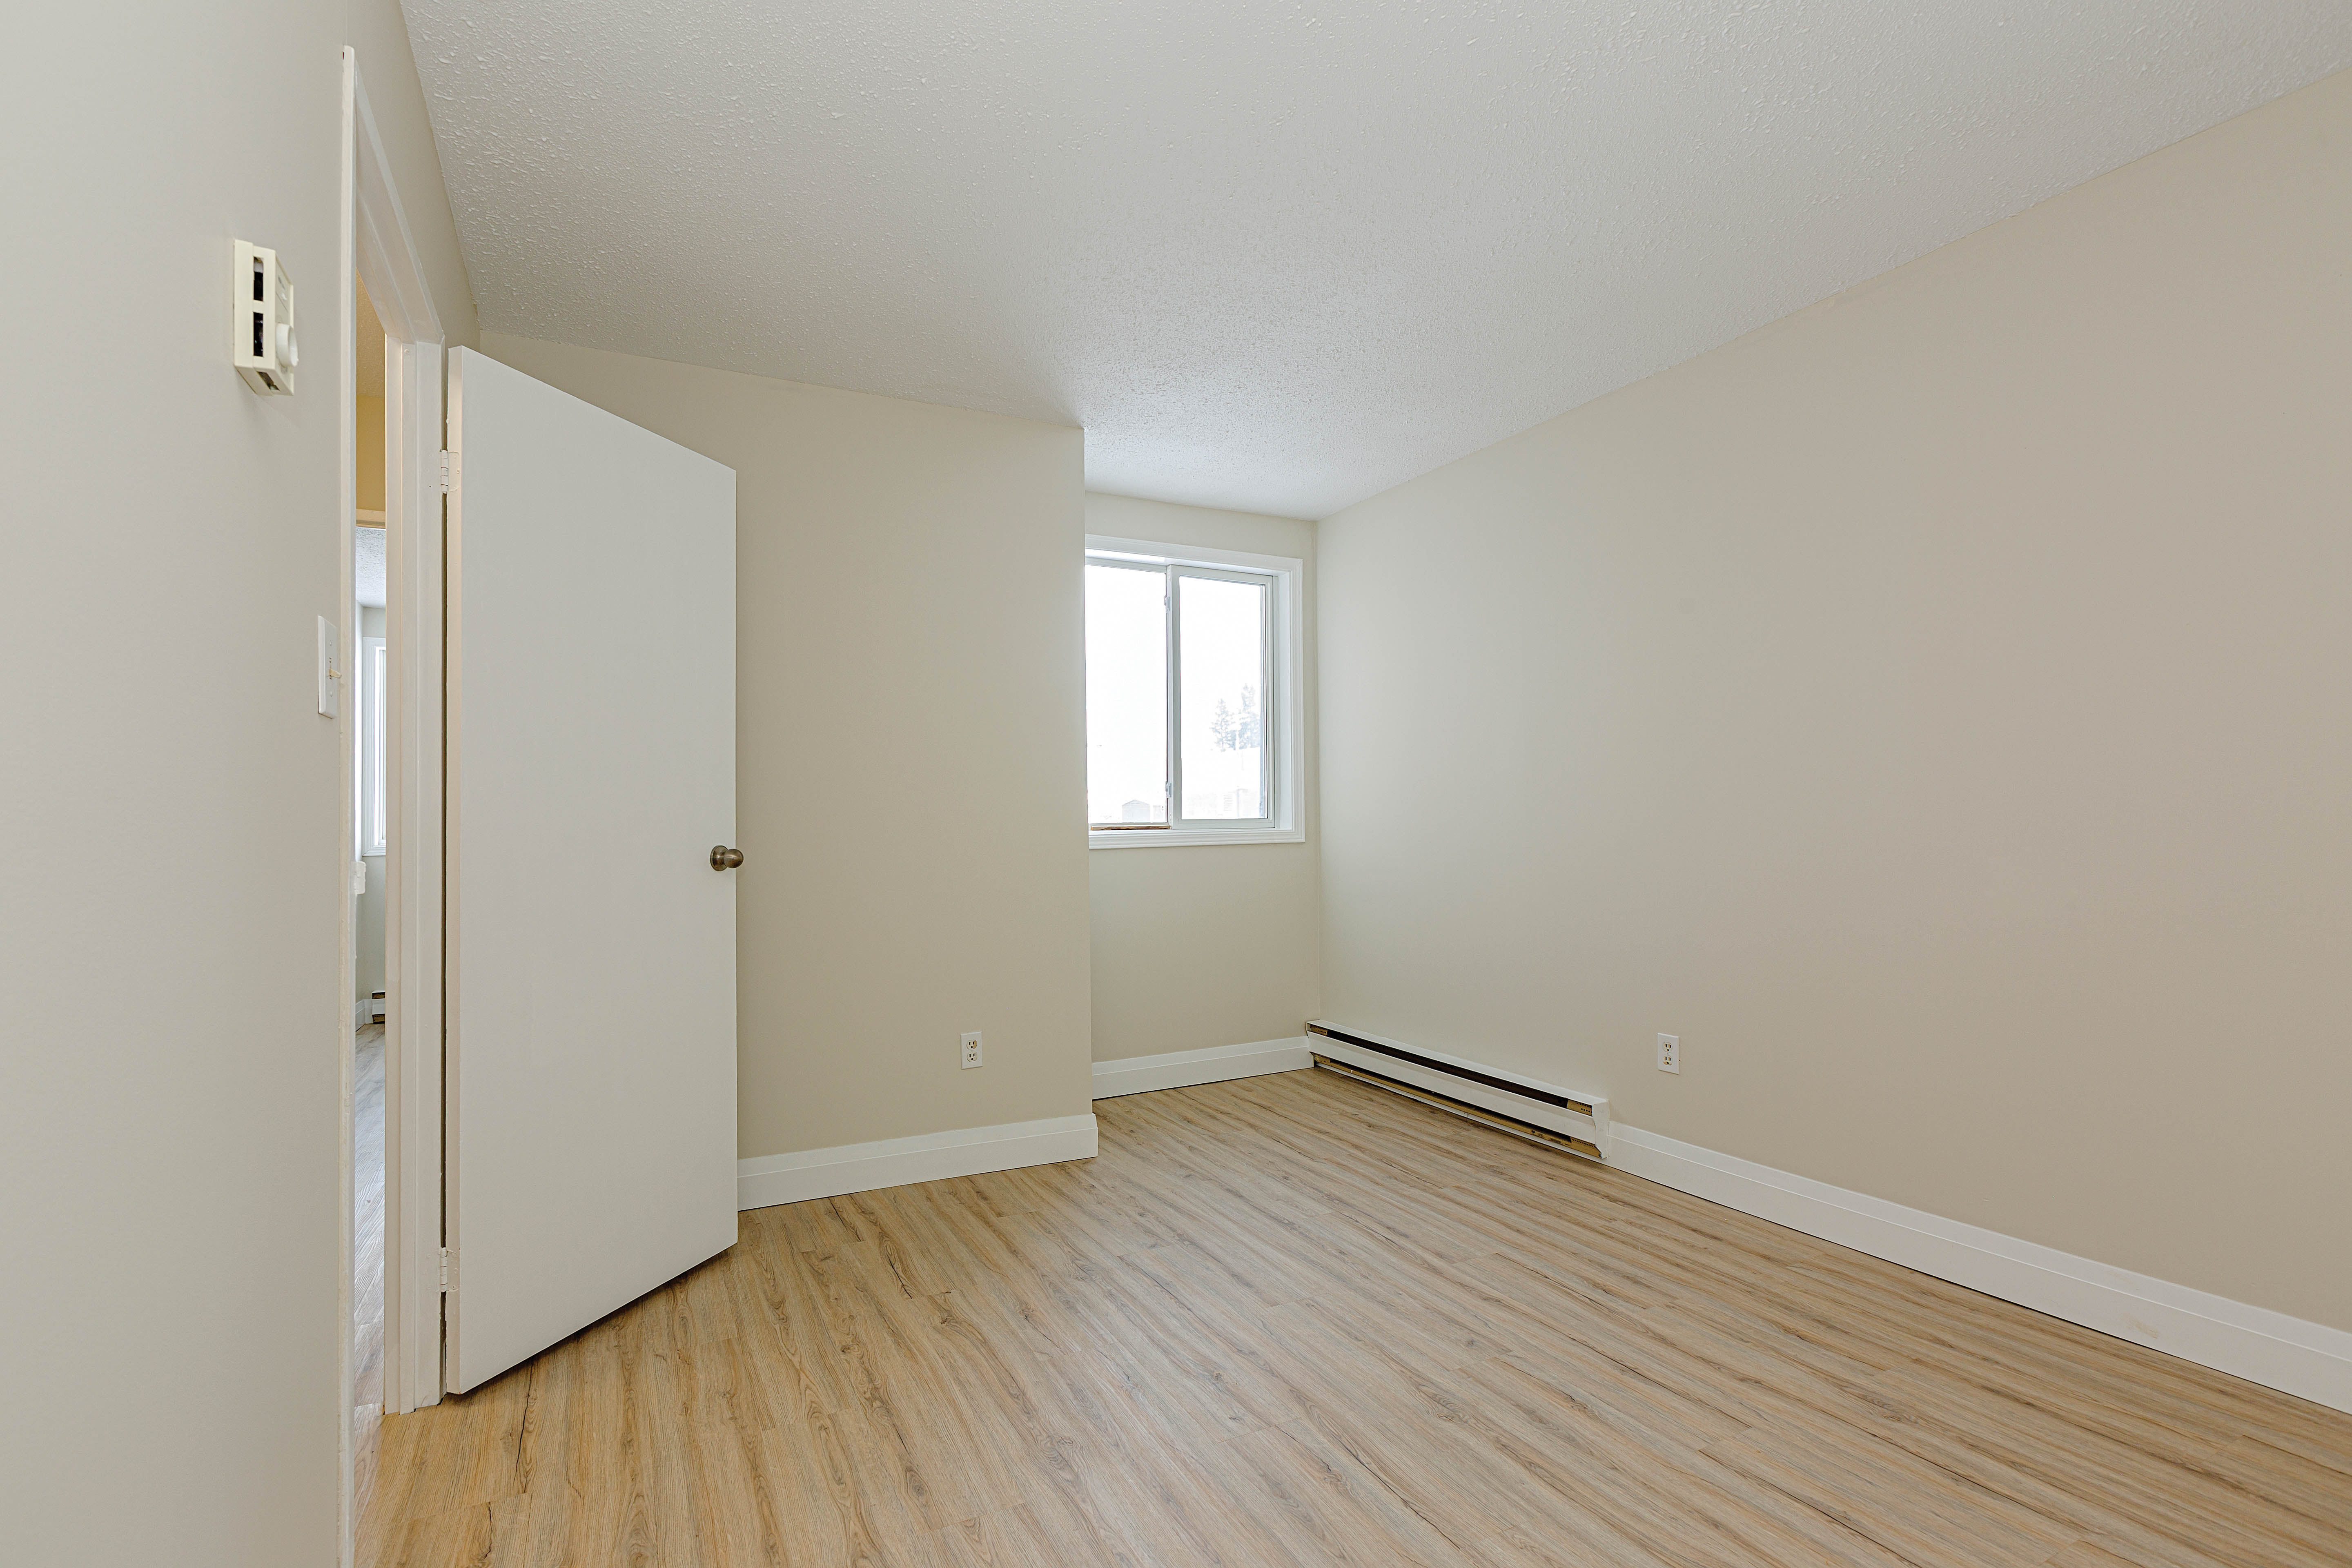 SkyLiving RiversideApartments 1214RiversideDR Timmins Unit111 TwoBed OneBath 0010 bedroom2